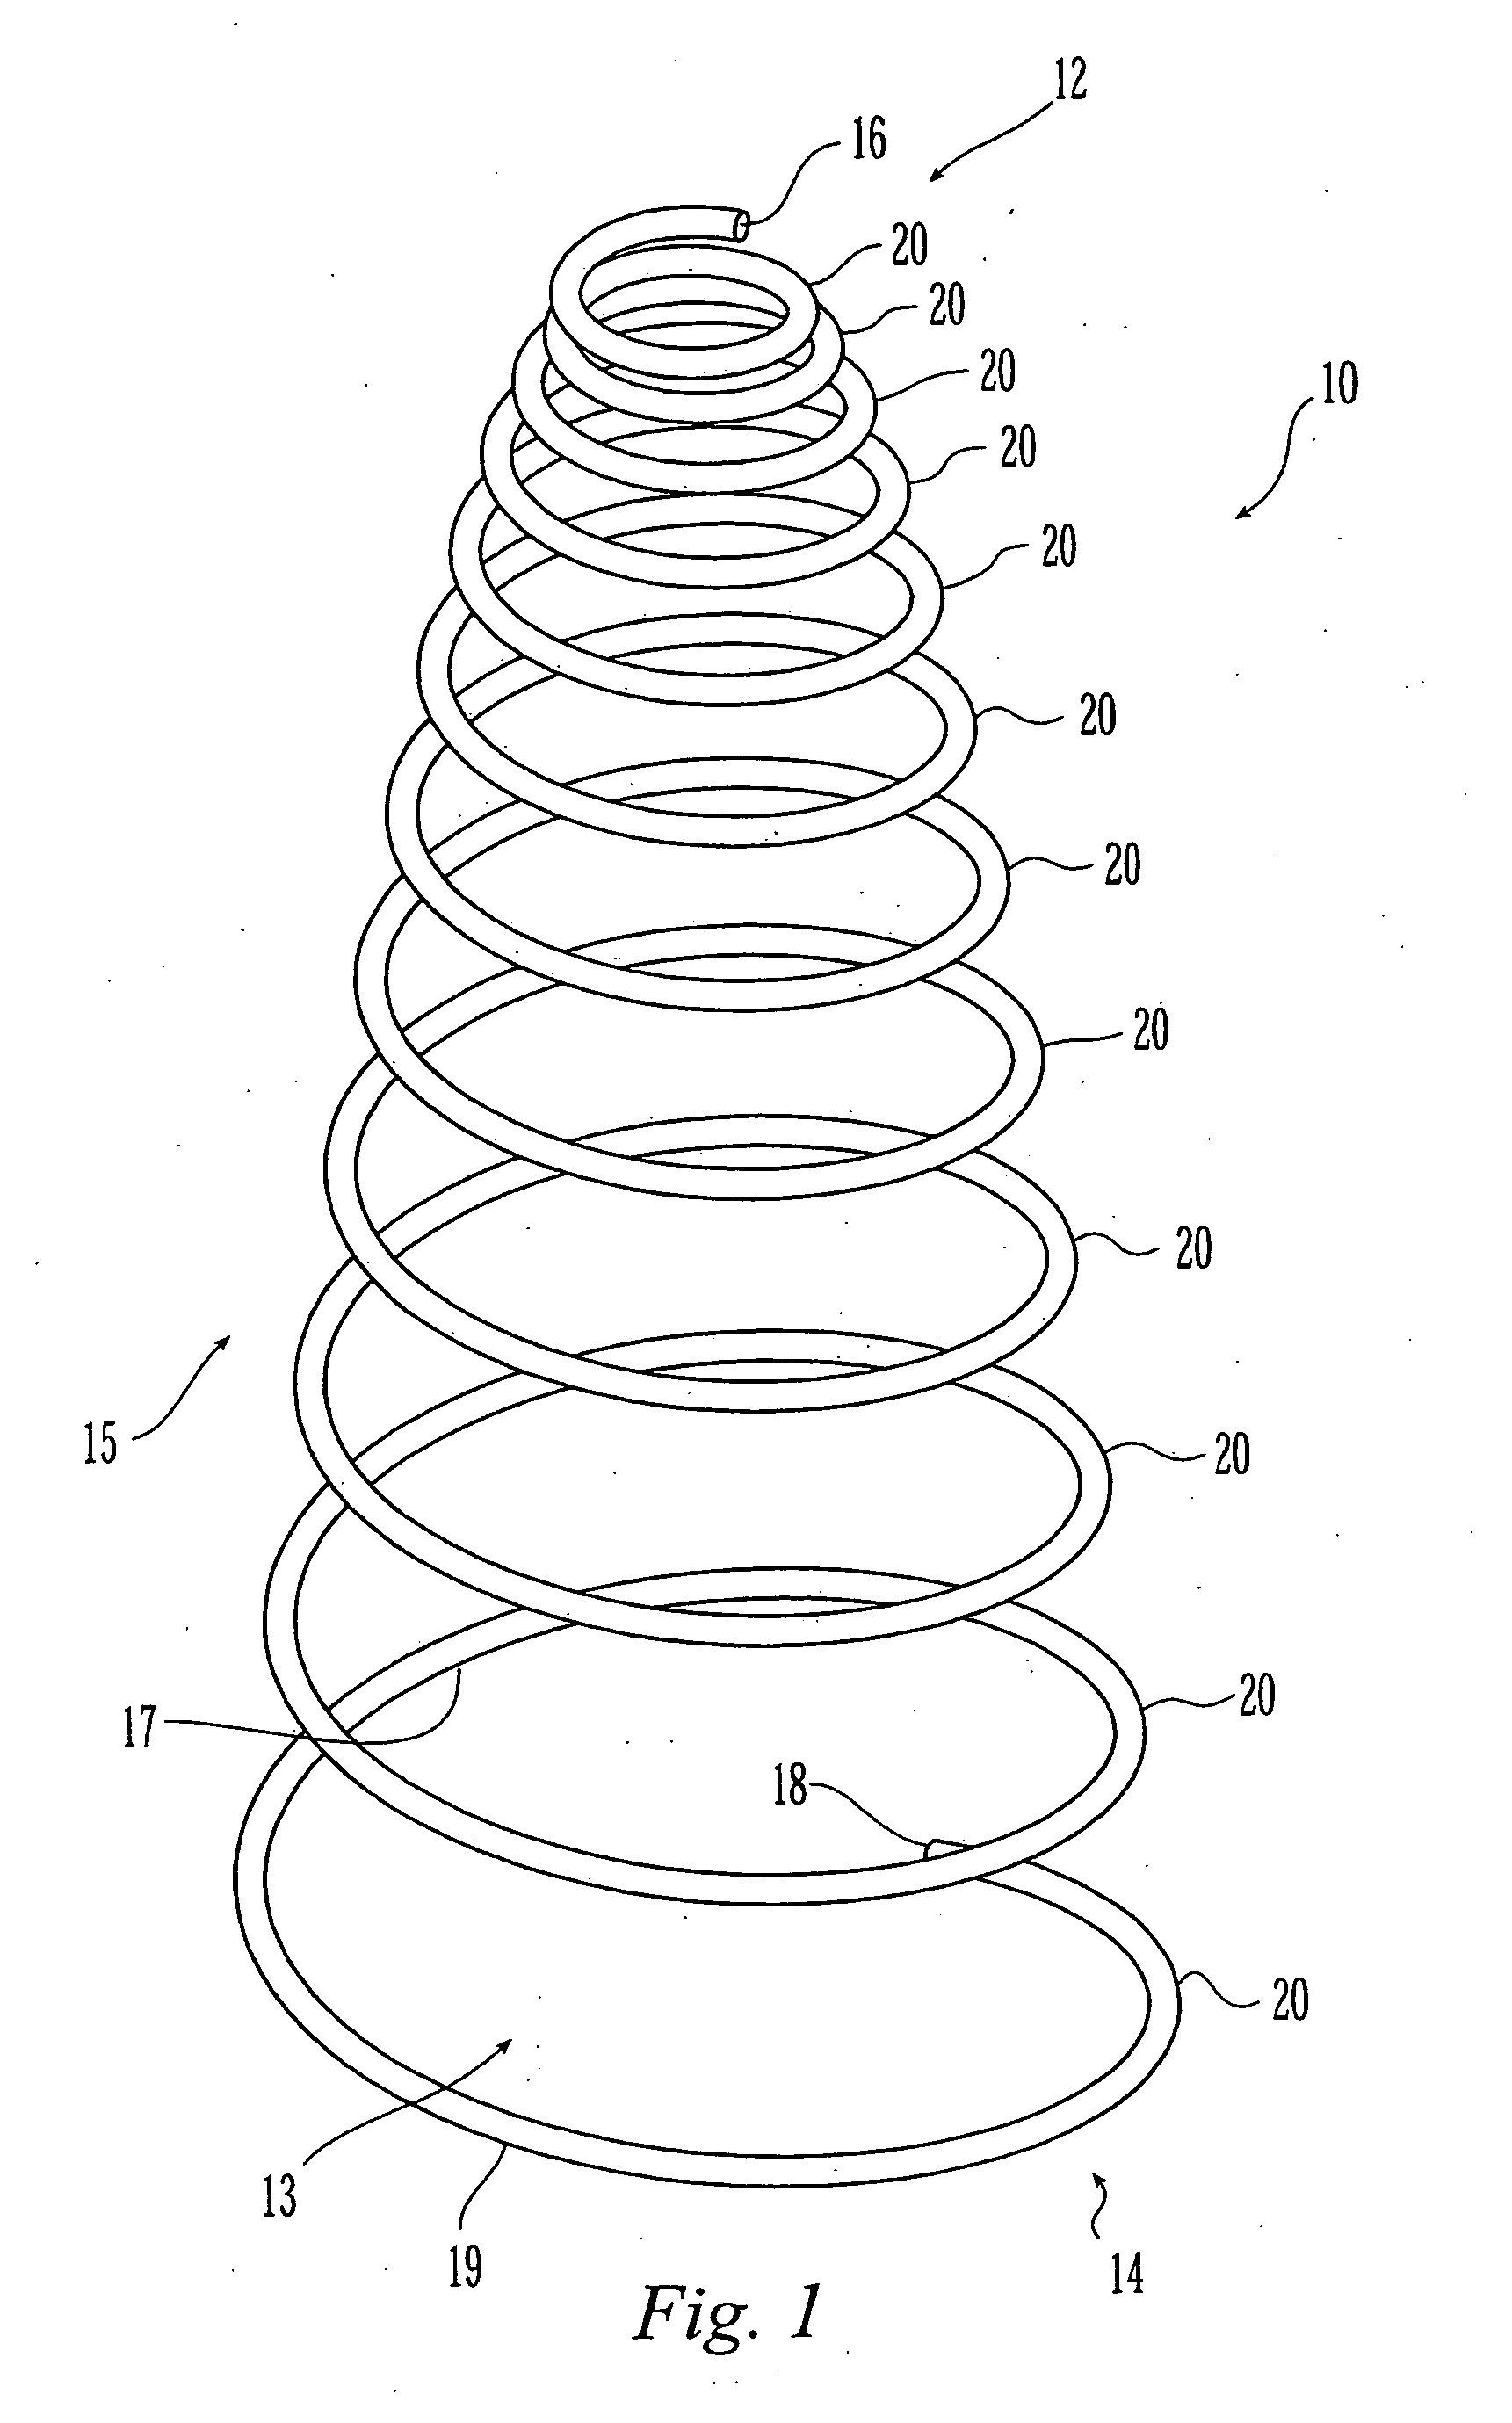 Occlusive coil manufacturing and delivery